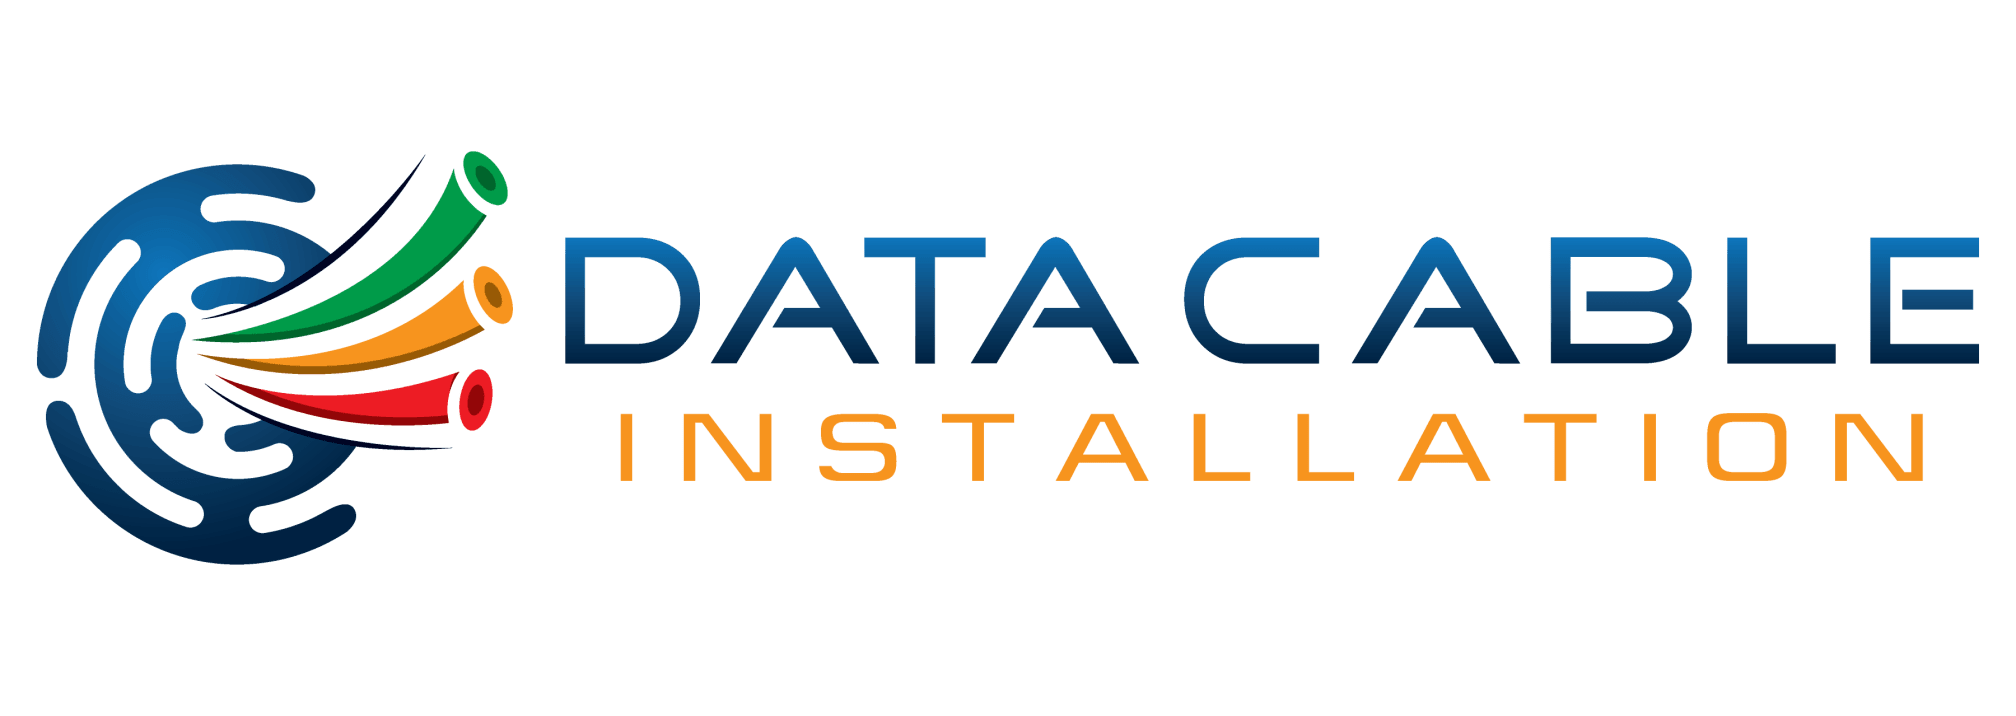 Images Data Cable Installation Ltd